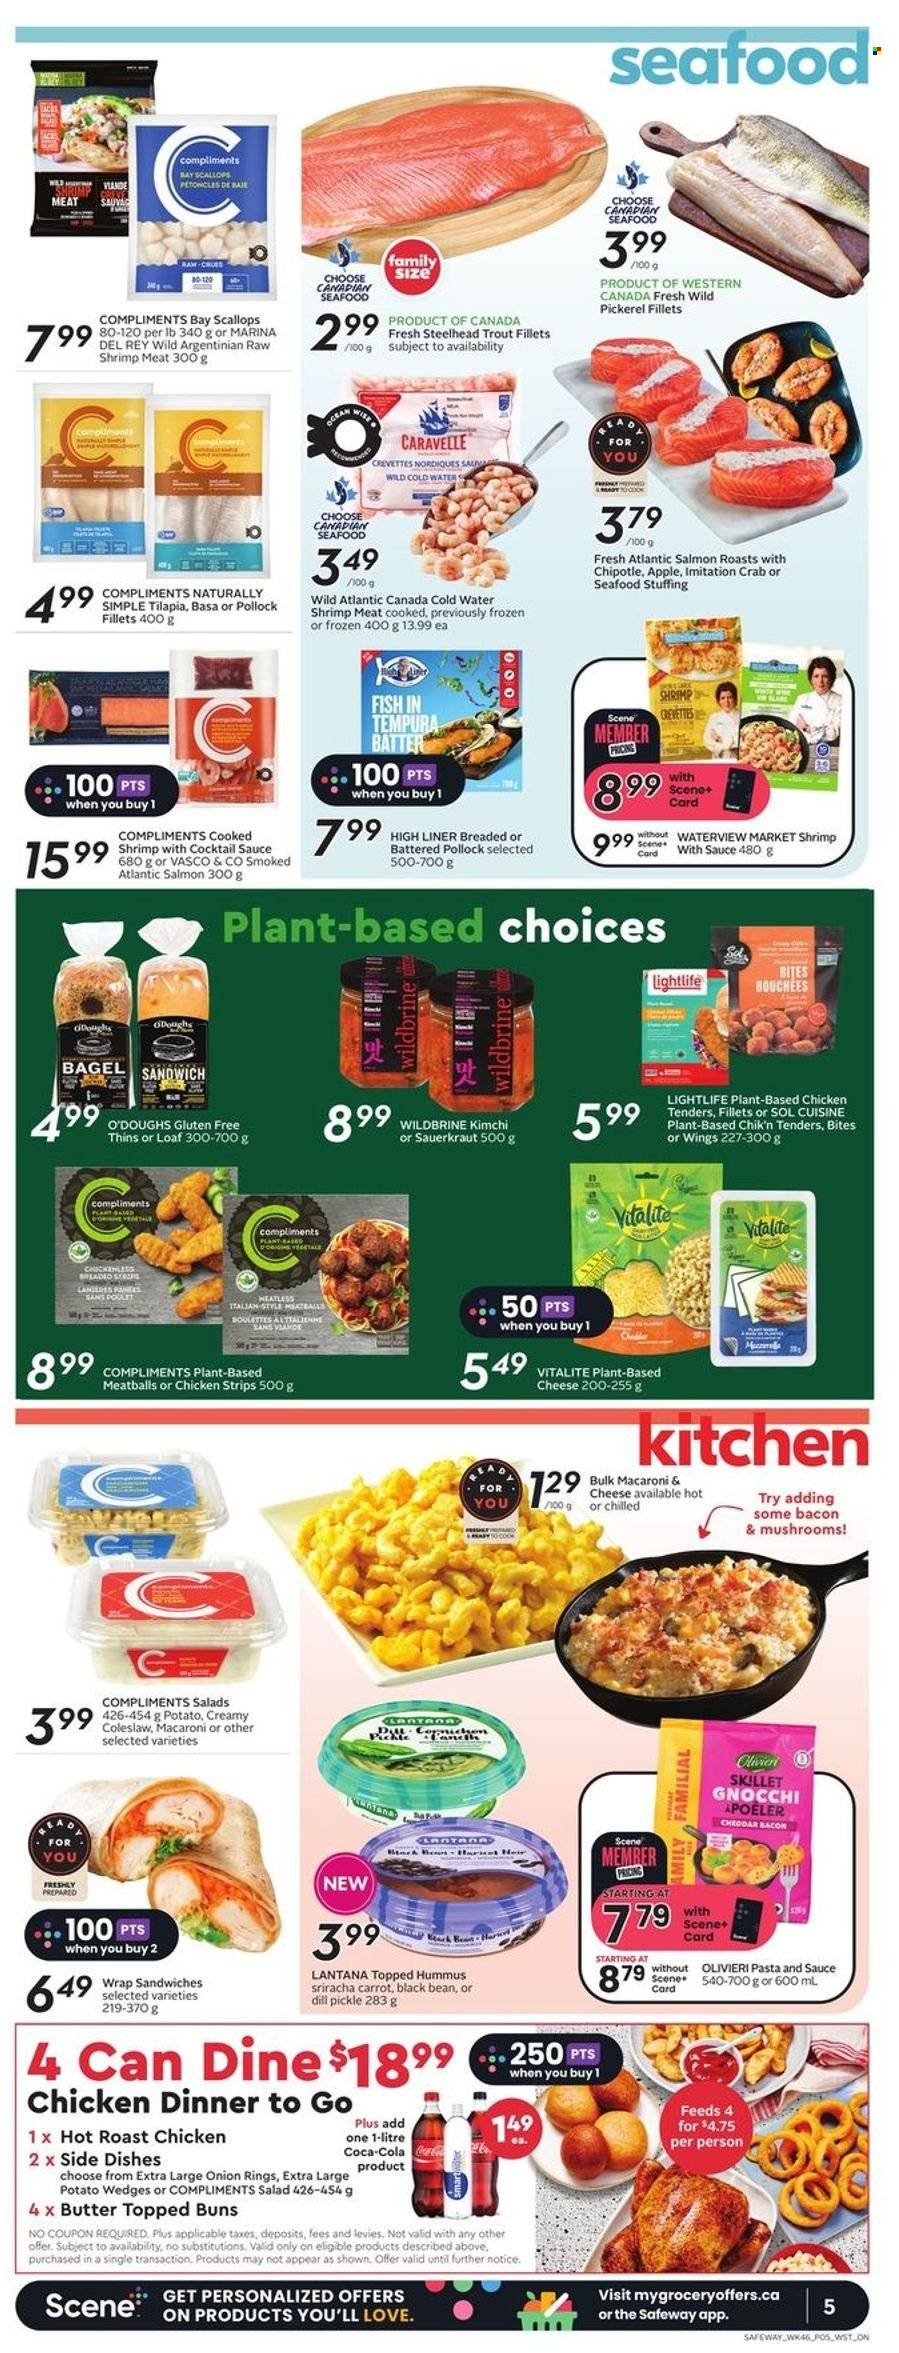 thumbnail - Safeway Flyer - March 16, 2023 - March 22, 2023 - Sales products - bagels, buns, salad, salmon, scallops, tilapia, trout, pollock, seafood, crab, fish, shrimps, walleye, coleslaw, macaroni & cheese, chicken roast, onion rings, chicken tenders, meatballs, sandwich, pasta, roast, bacon, hummus, butter, strips, chicken strips, potato wedges, dill pickle, Thins, sauerkraut, dill, cocktail sauce, sriracha, water, Sol, gnocchi. Page 7.